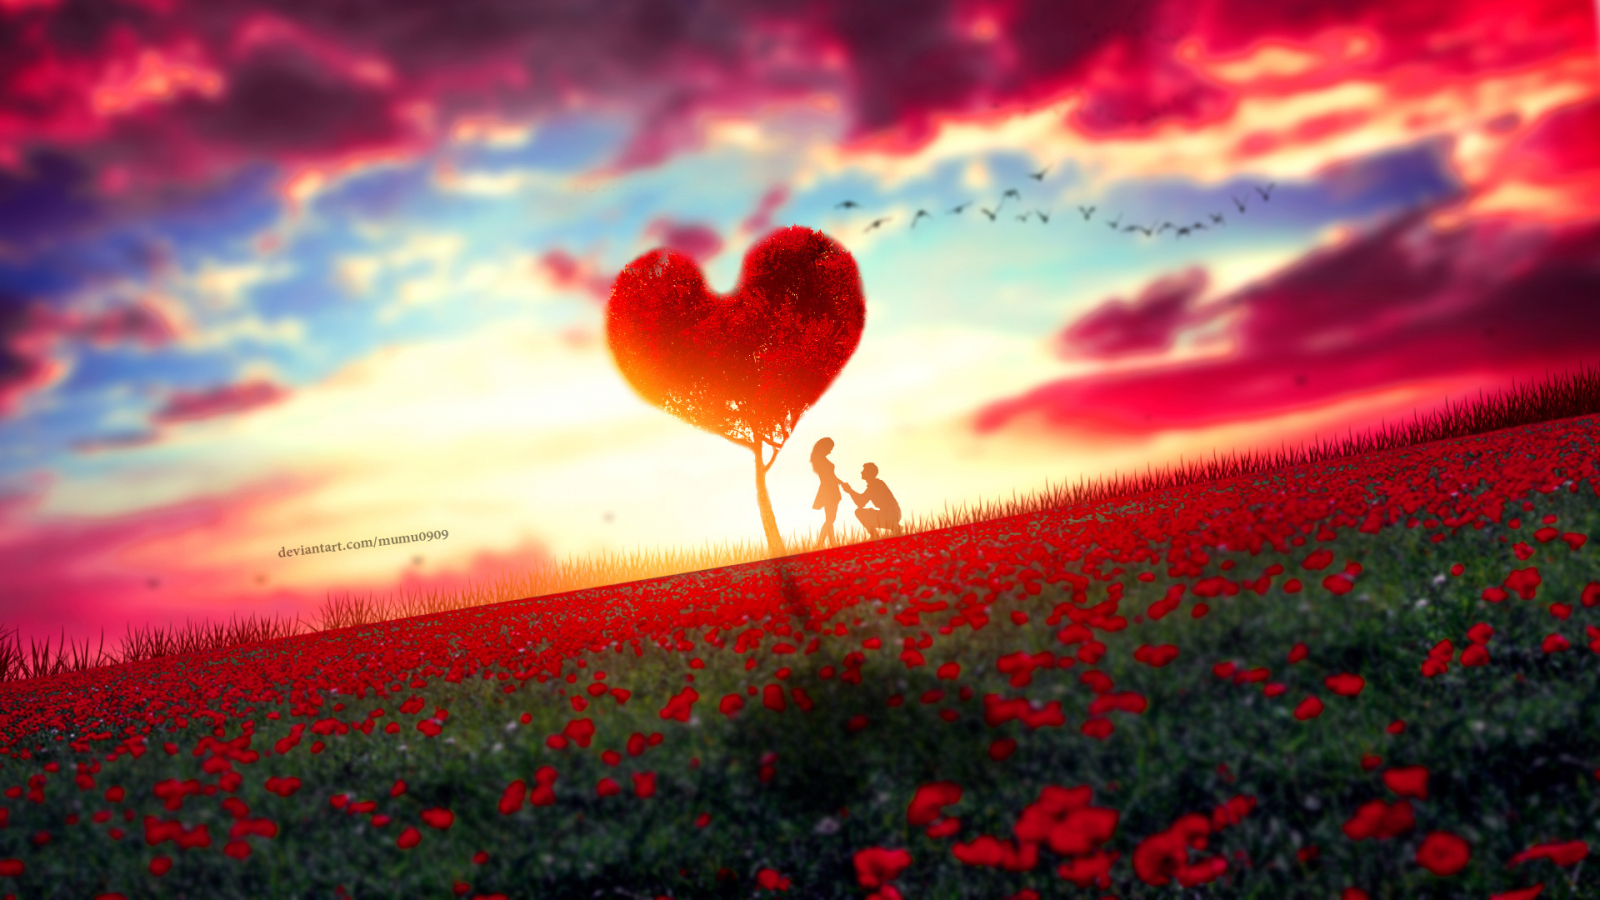 Download wallpaper 1600x900 couple, romantic moment, rose farm, tree,  sunset, 16:9 widescreen 1600x900 hd background, 19410